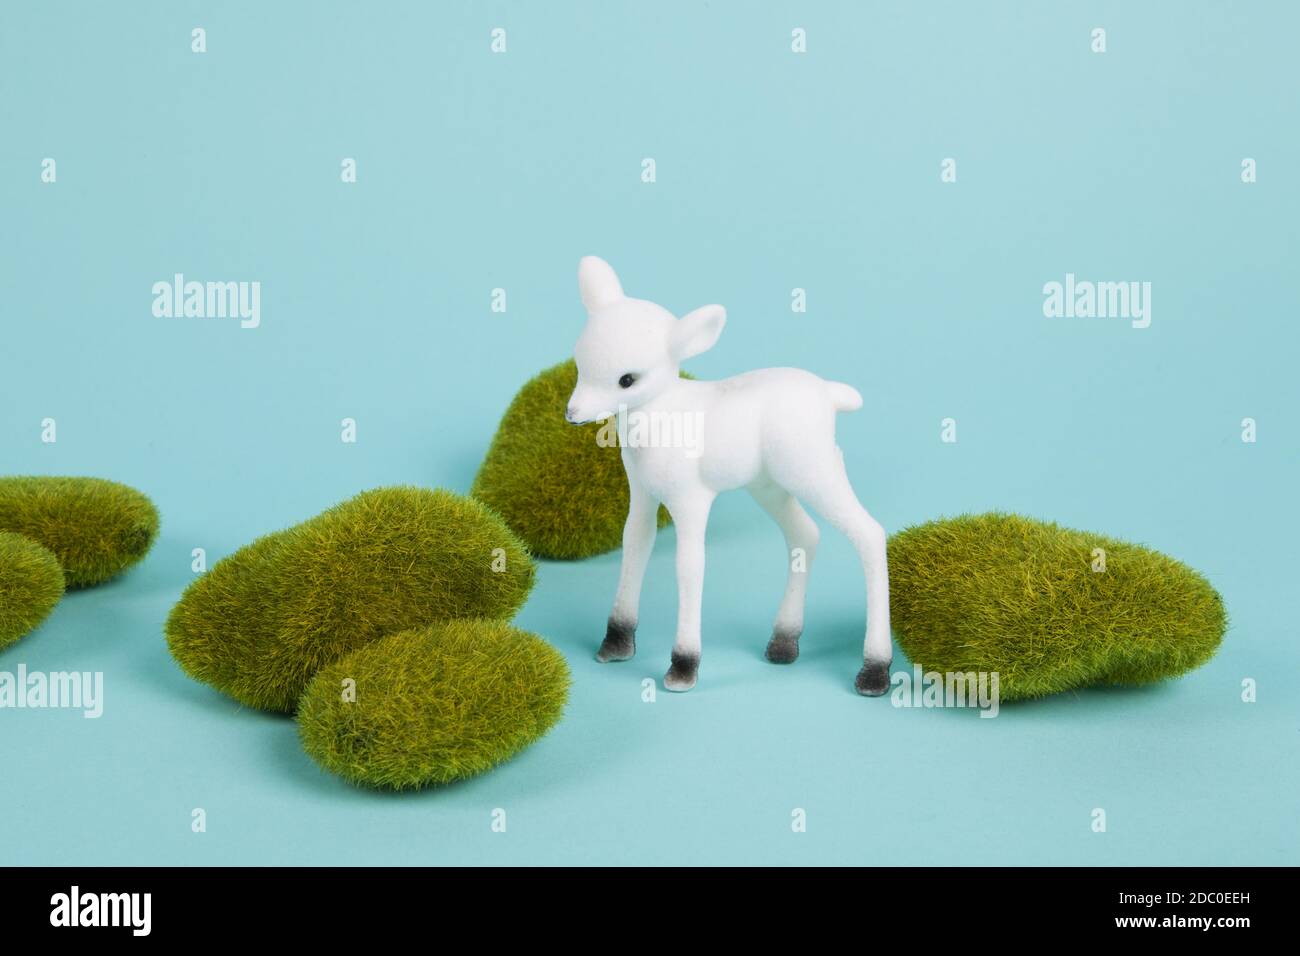 a white fawn among moss rocks set on a blue background. Pop atmosphere. minimal color still life photography Stock Photo